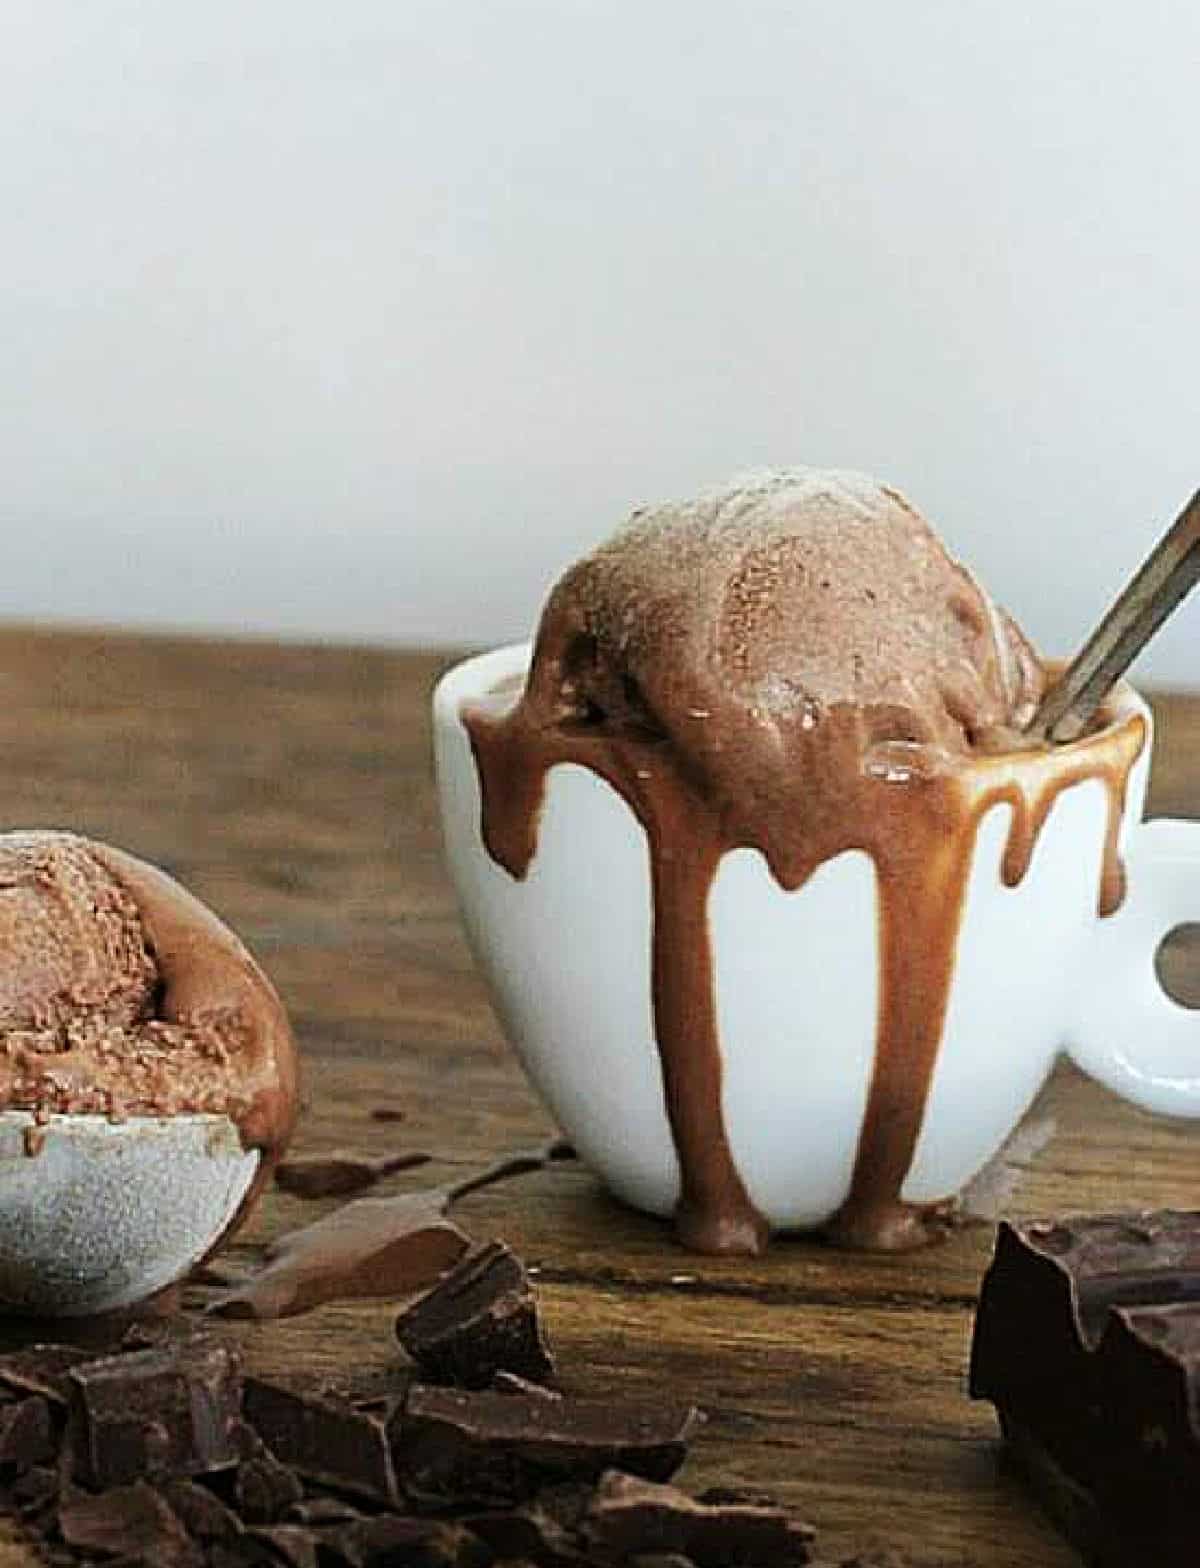 White cup with slightly melting chocolate ice cream on a wooden table, chocolate pieces around